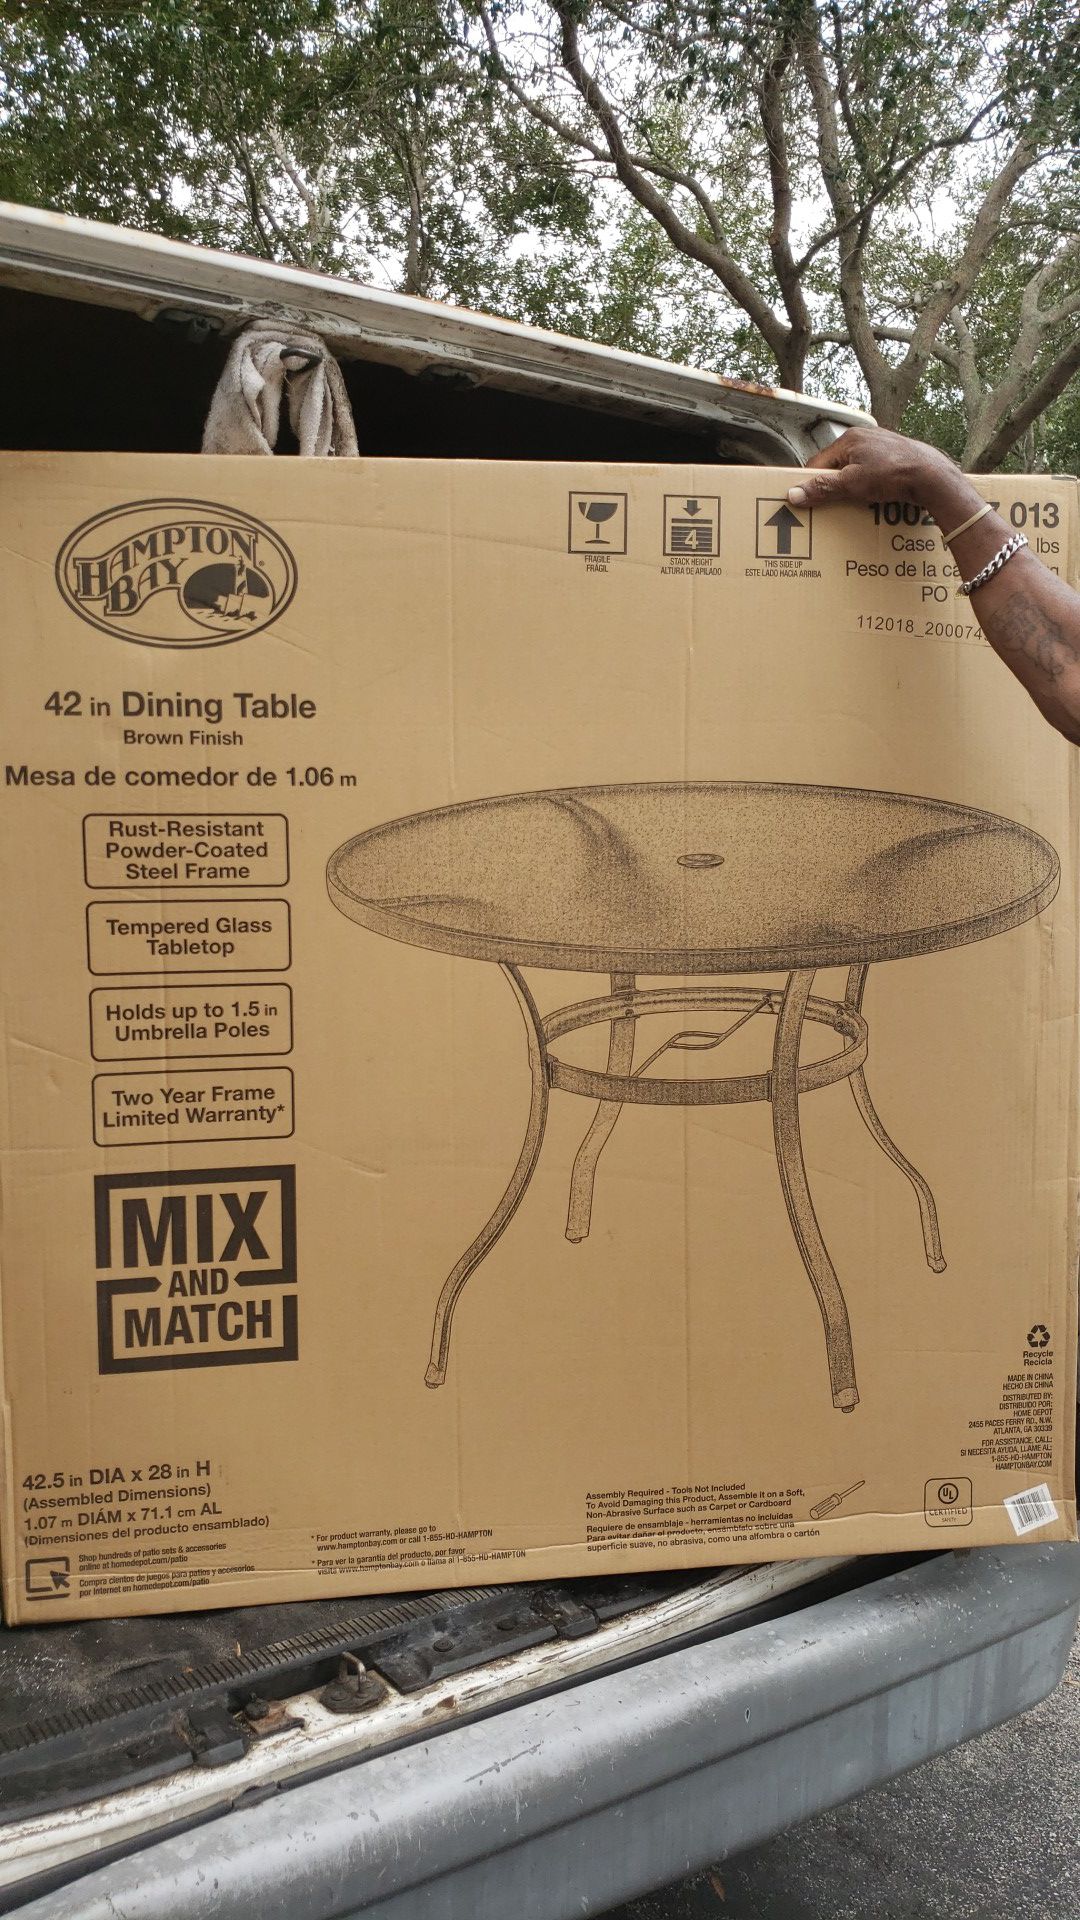 Brand new in box patio table $40